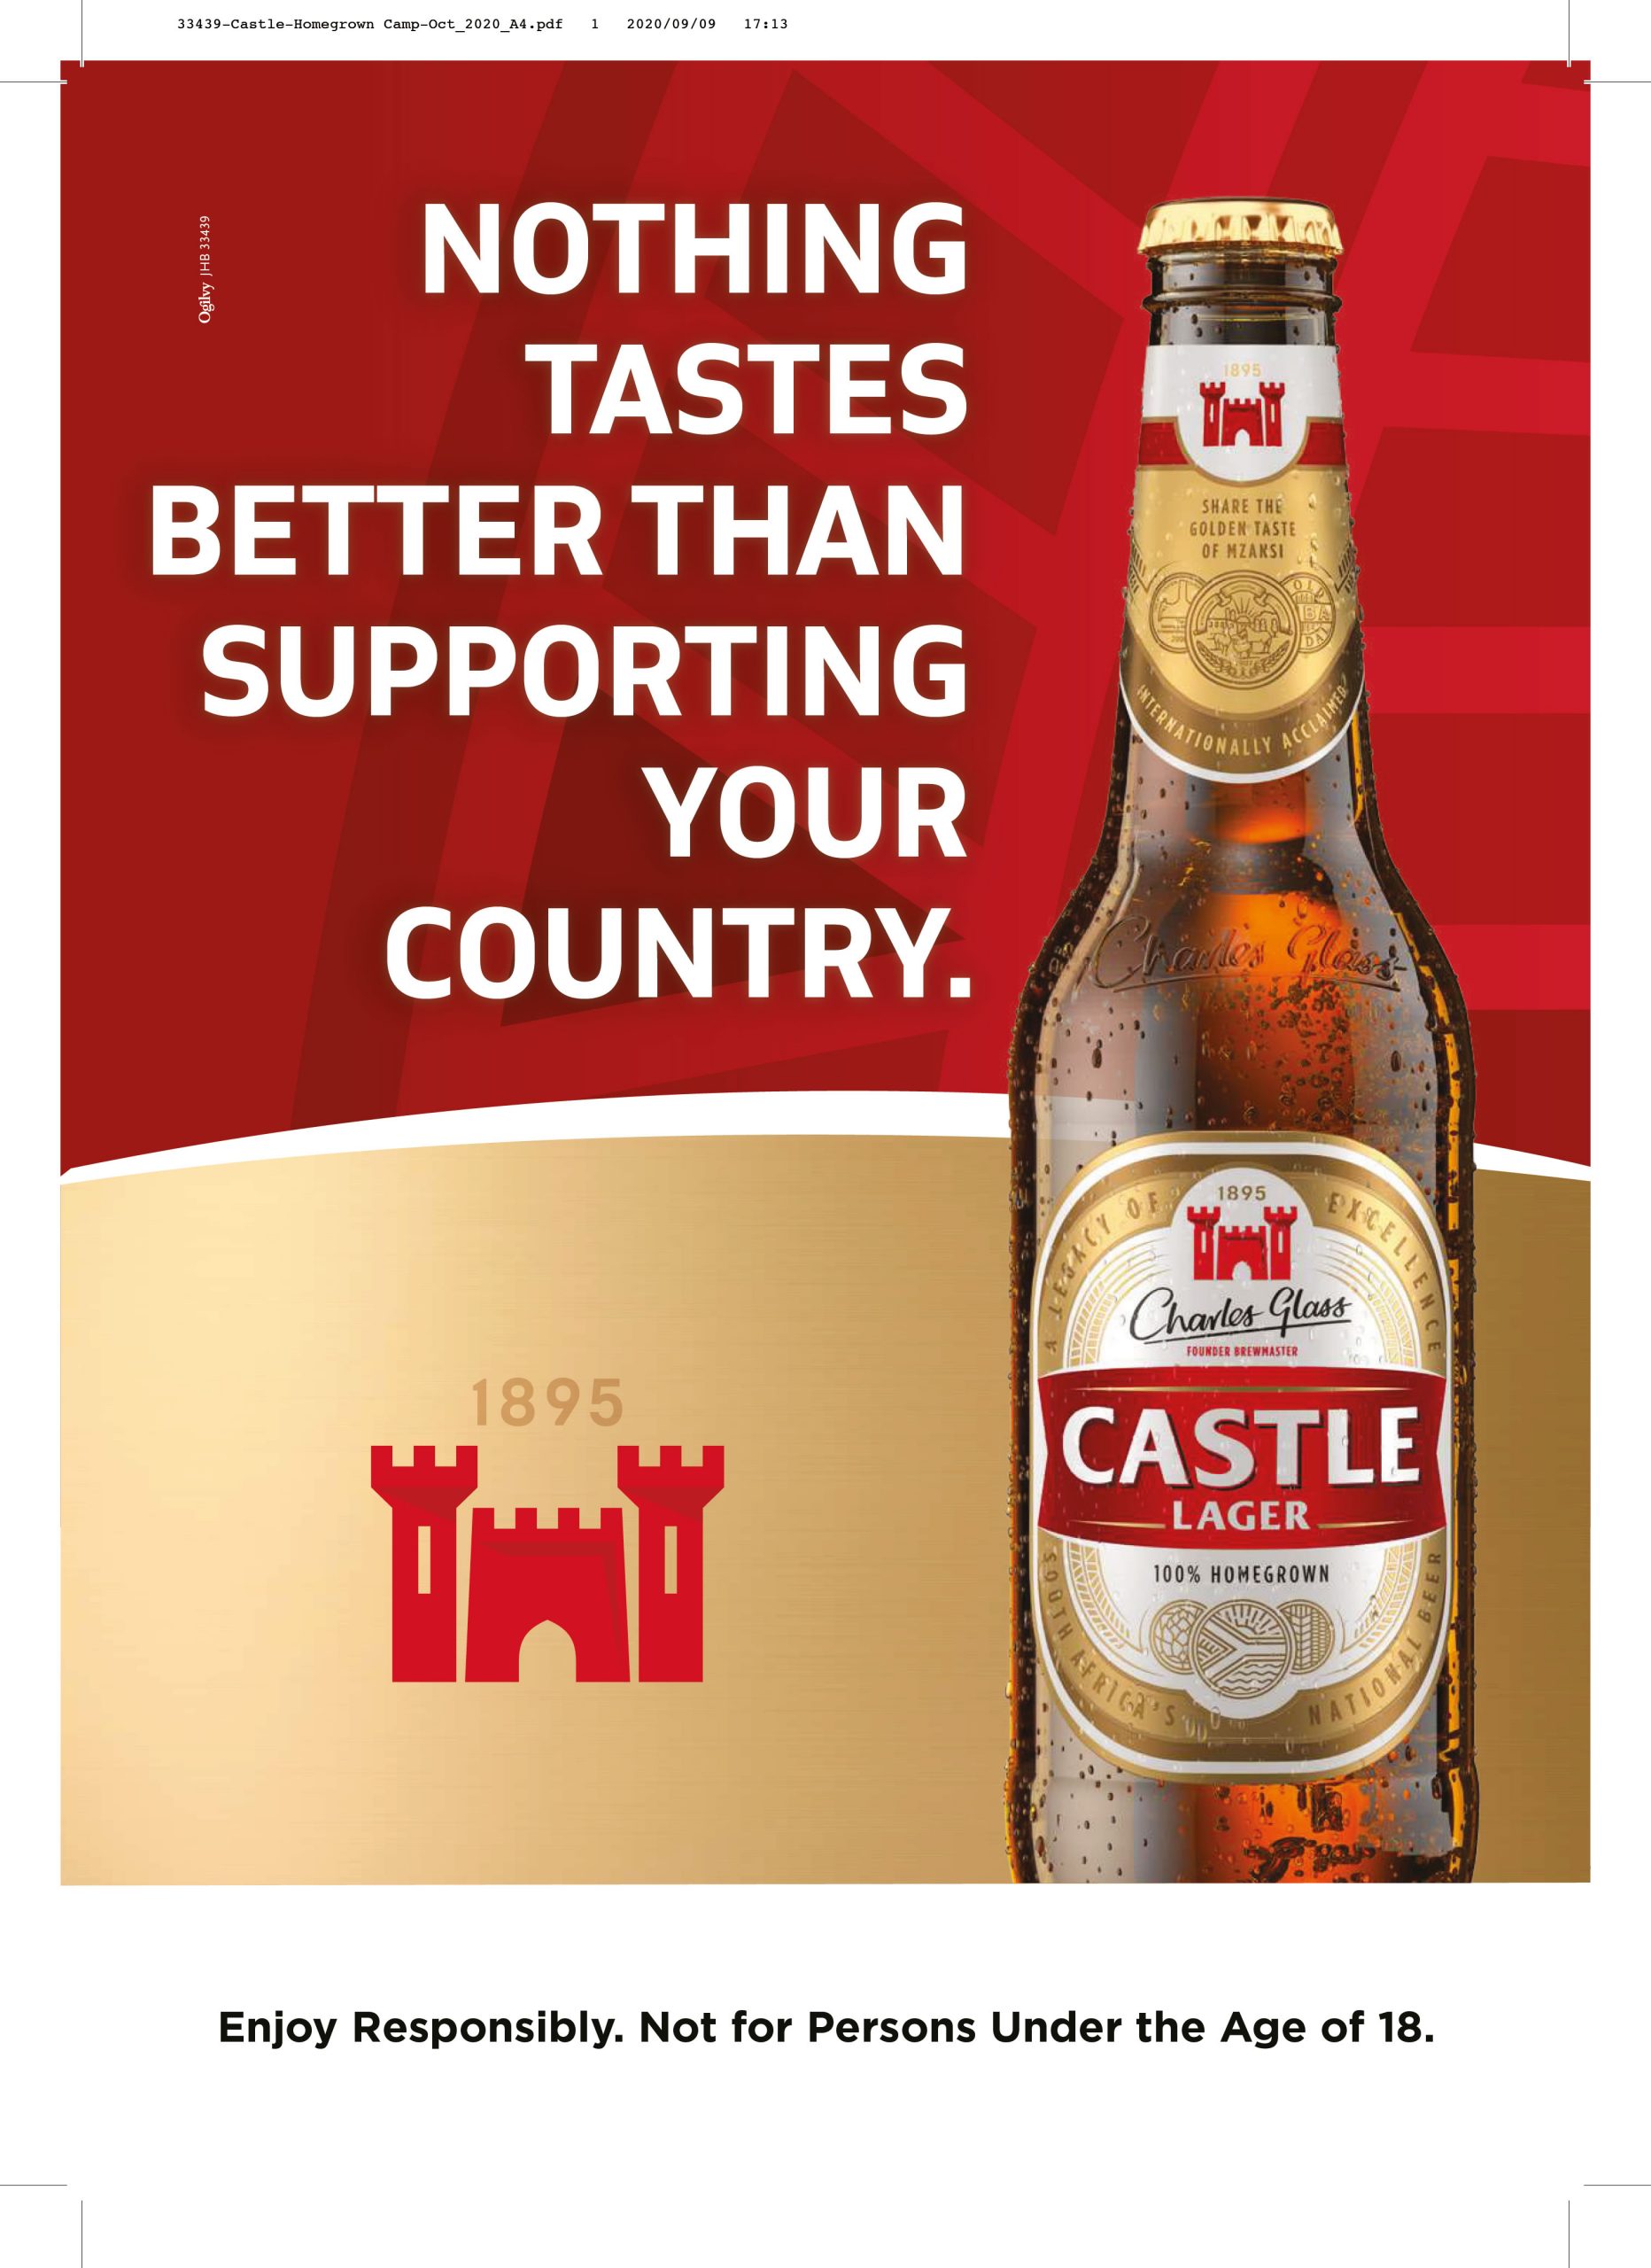 Castle Lager Celebrates 125 Years Of Homegrown Heritage With A Brandnew Look! DrinksFeed